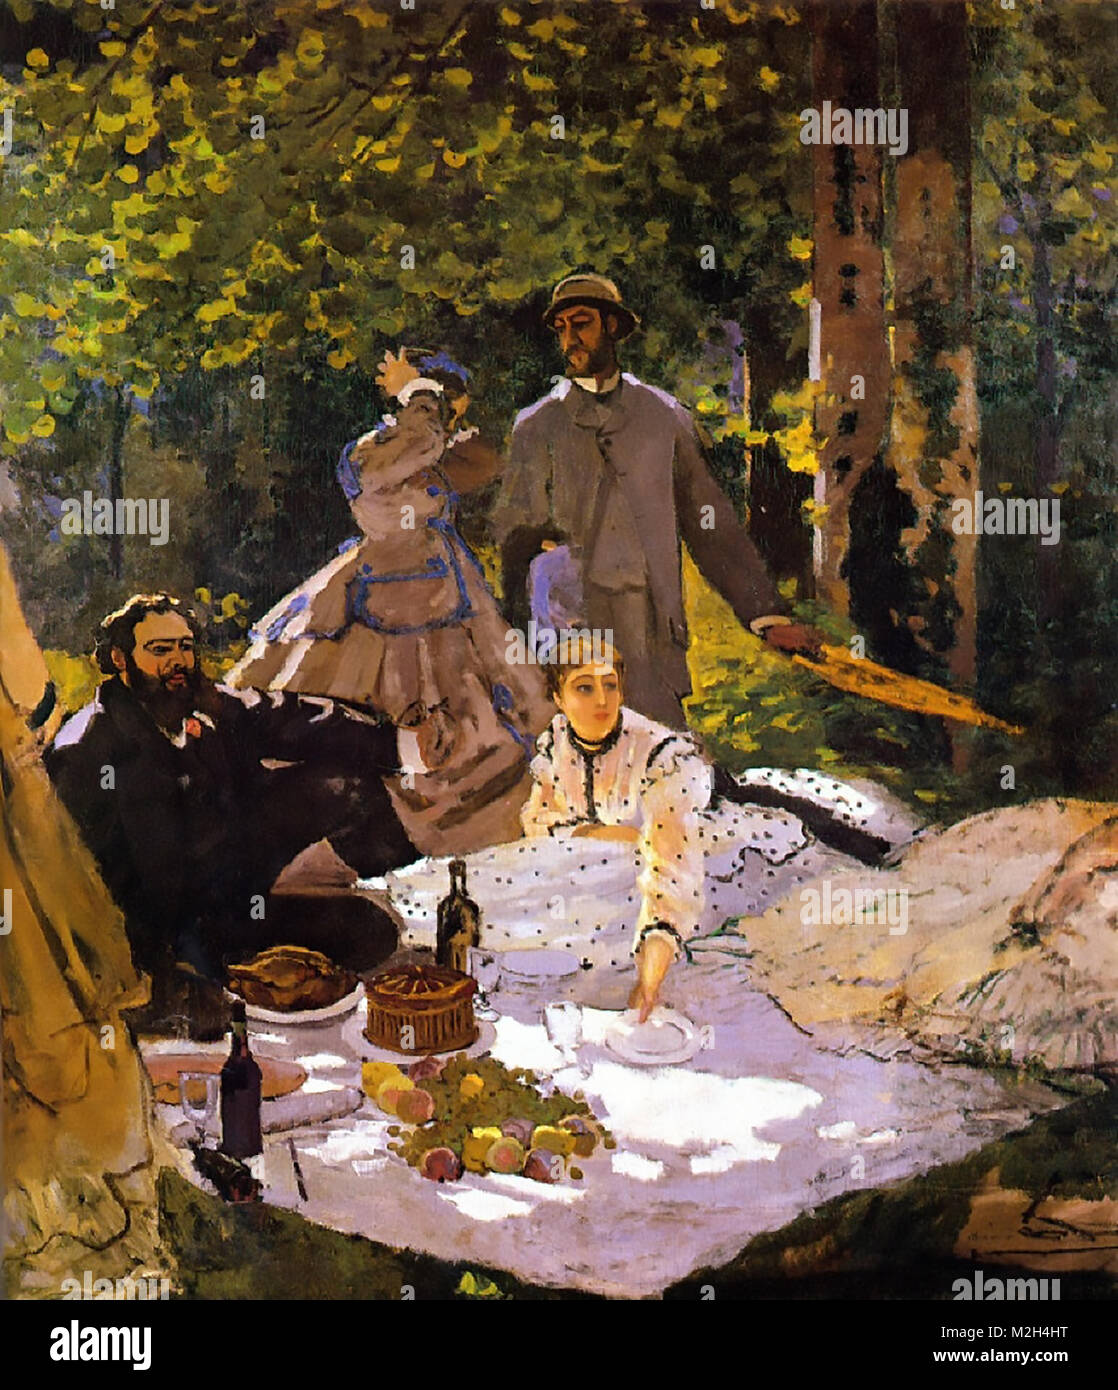 CLAUDE MONET (1840-1926) French Impressionist painter. Right section of 'Le dejeuner sur l'herbe' painted 1865-1866 Stock Photo